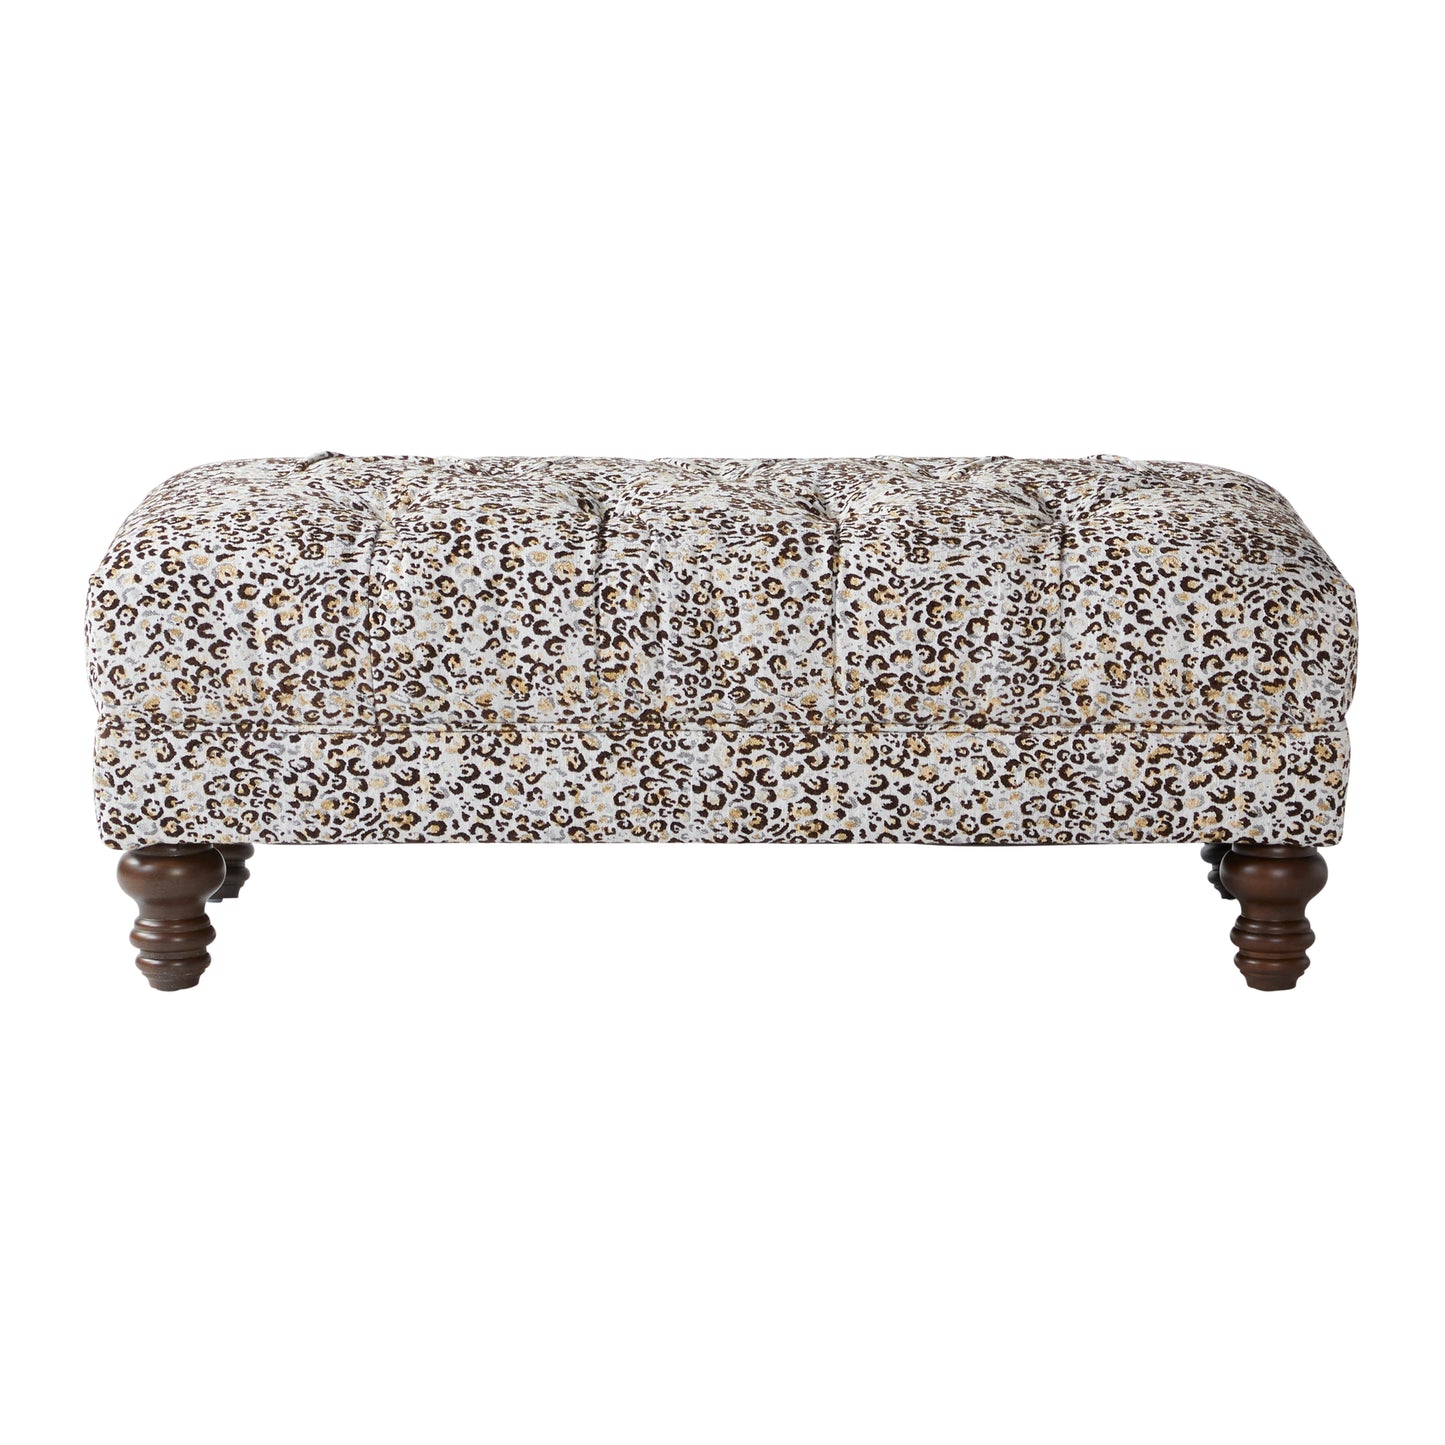 Roundhill Furniture Charbilia Fabric Tufted Cocktail Ottoman in Dexter Cafe